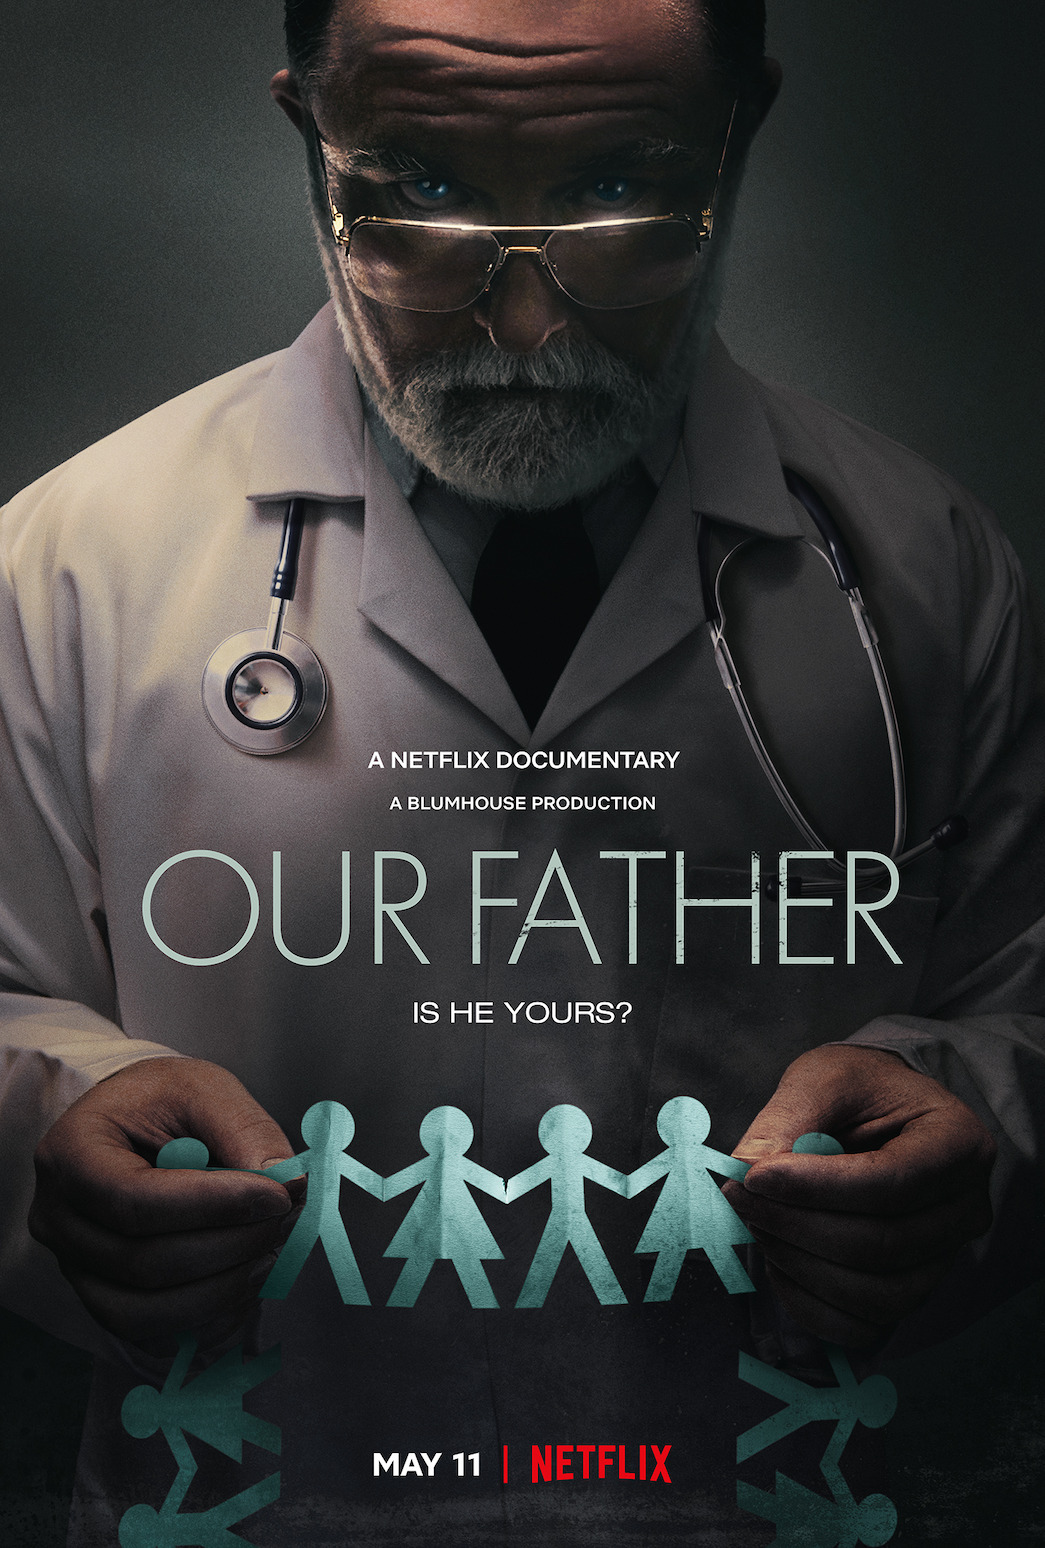 Is “Our Father” on Netflix